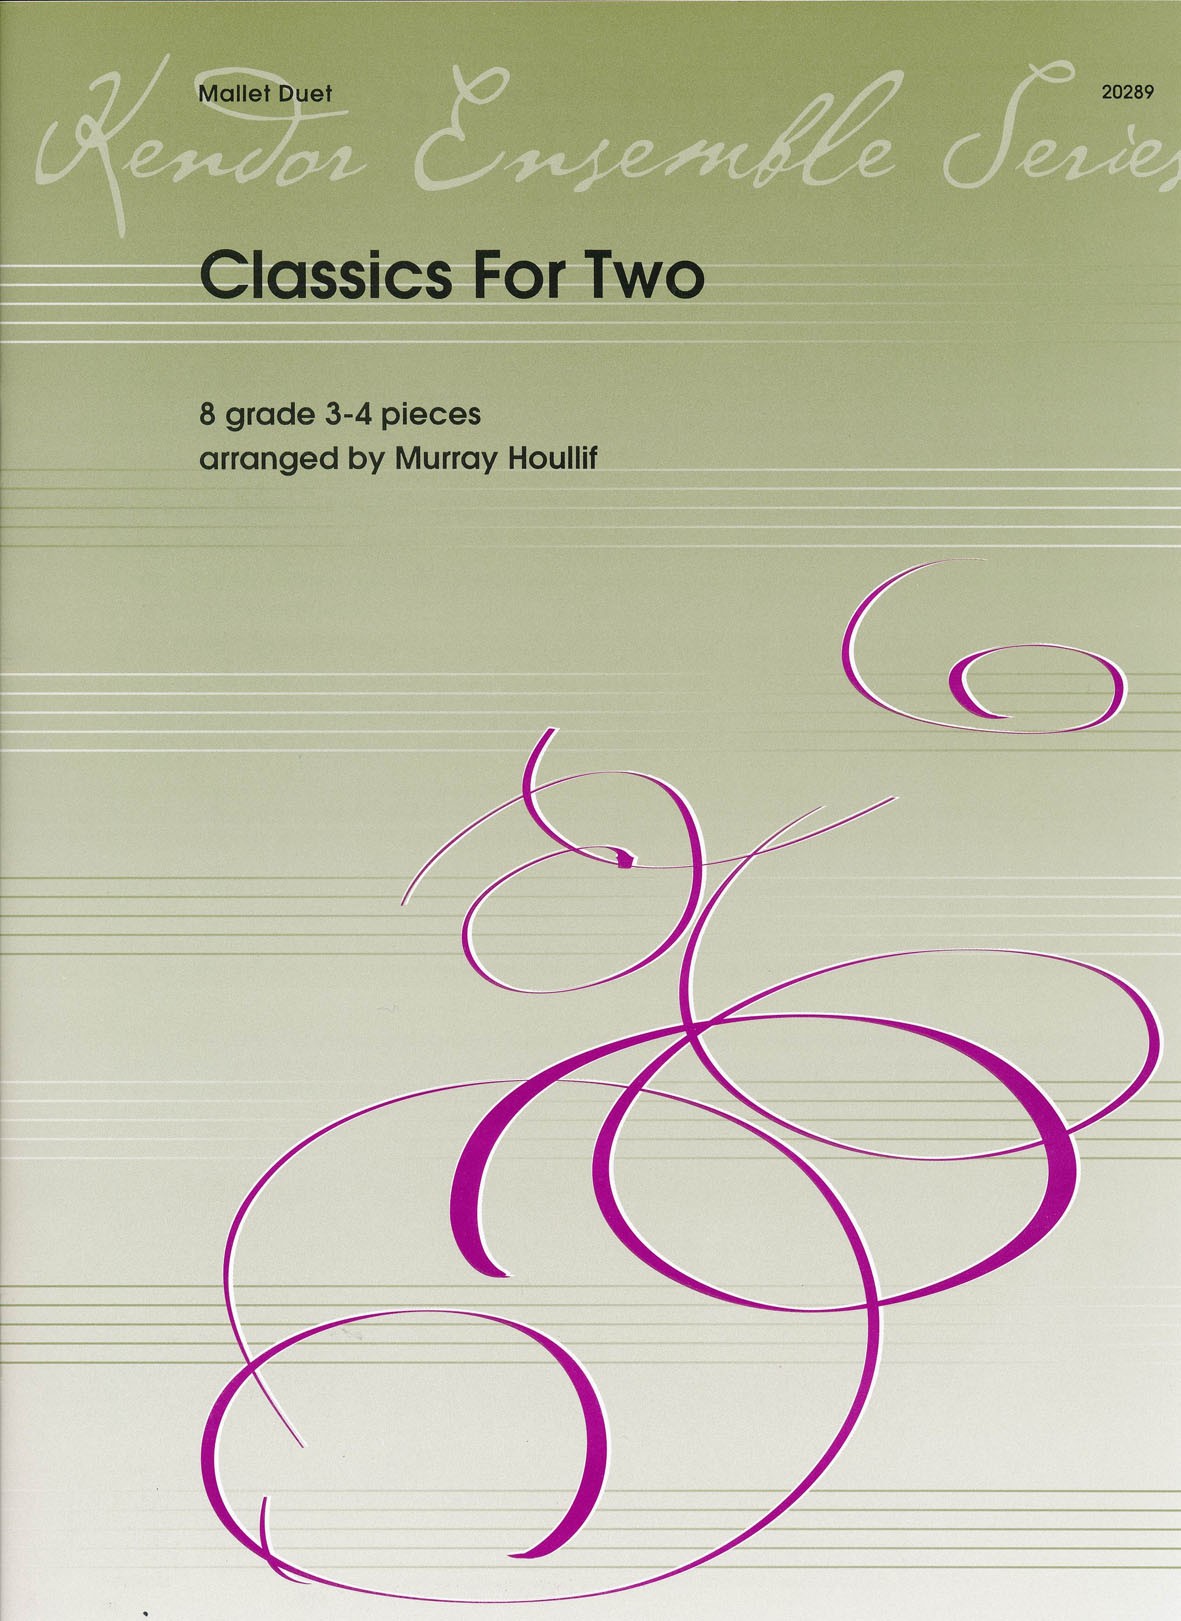 Classics For Two by Murray Houllif